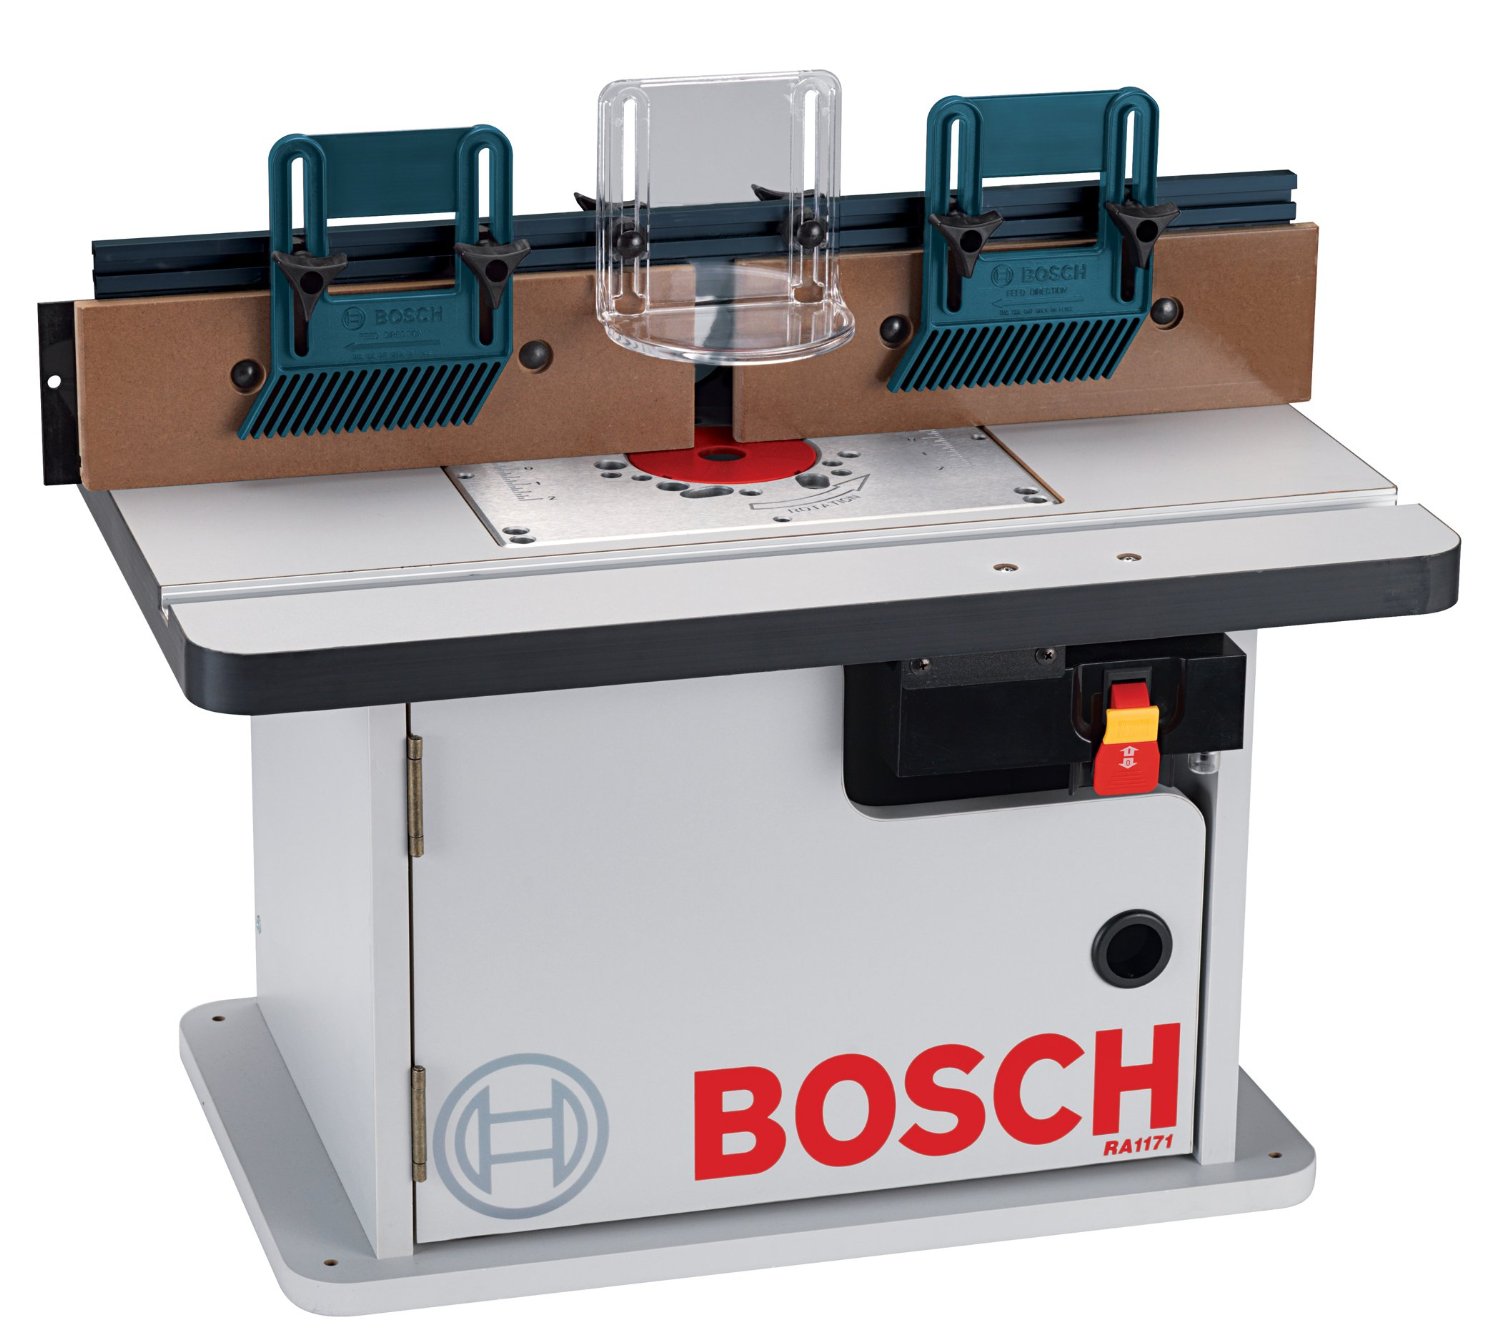 Bosch RA1171 Router Table – Review